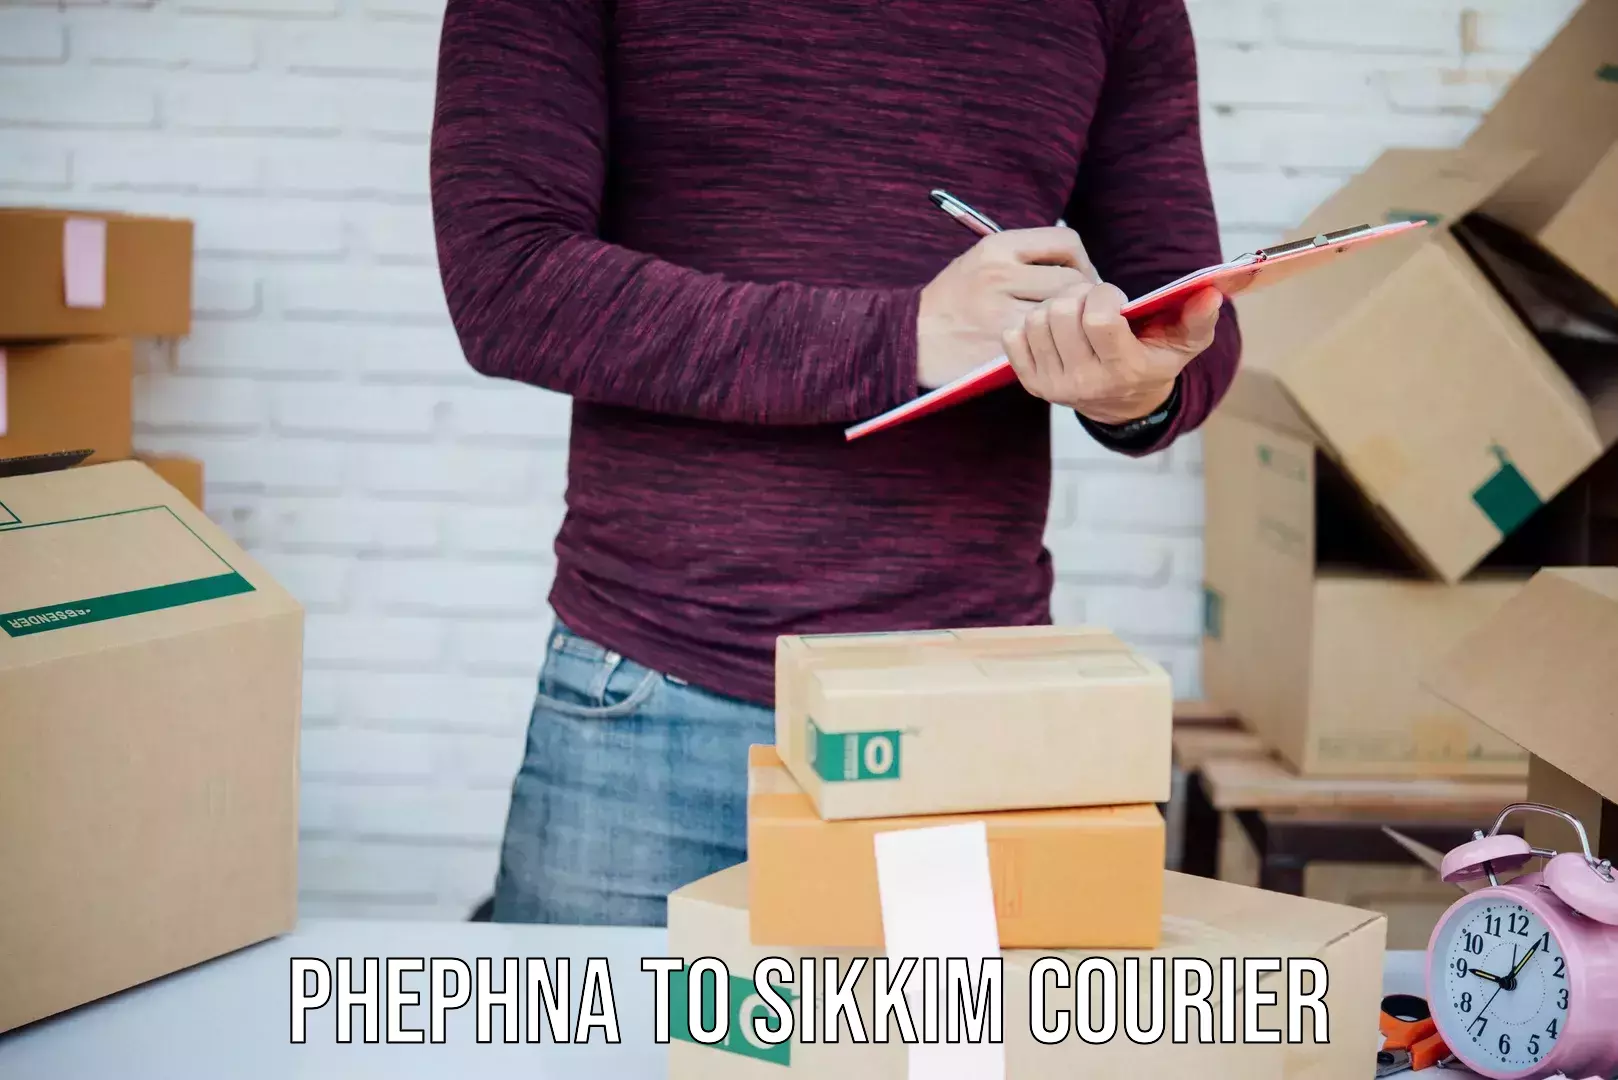 Courier service booking Phephna to Namchi